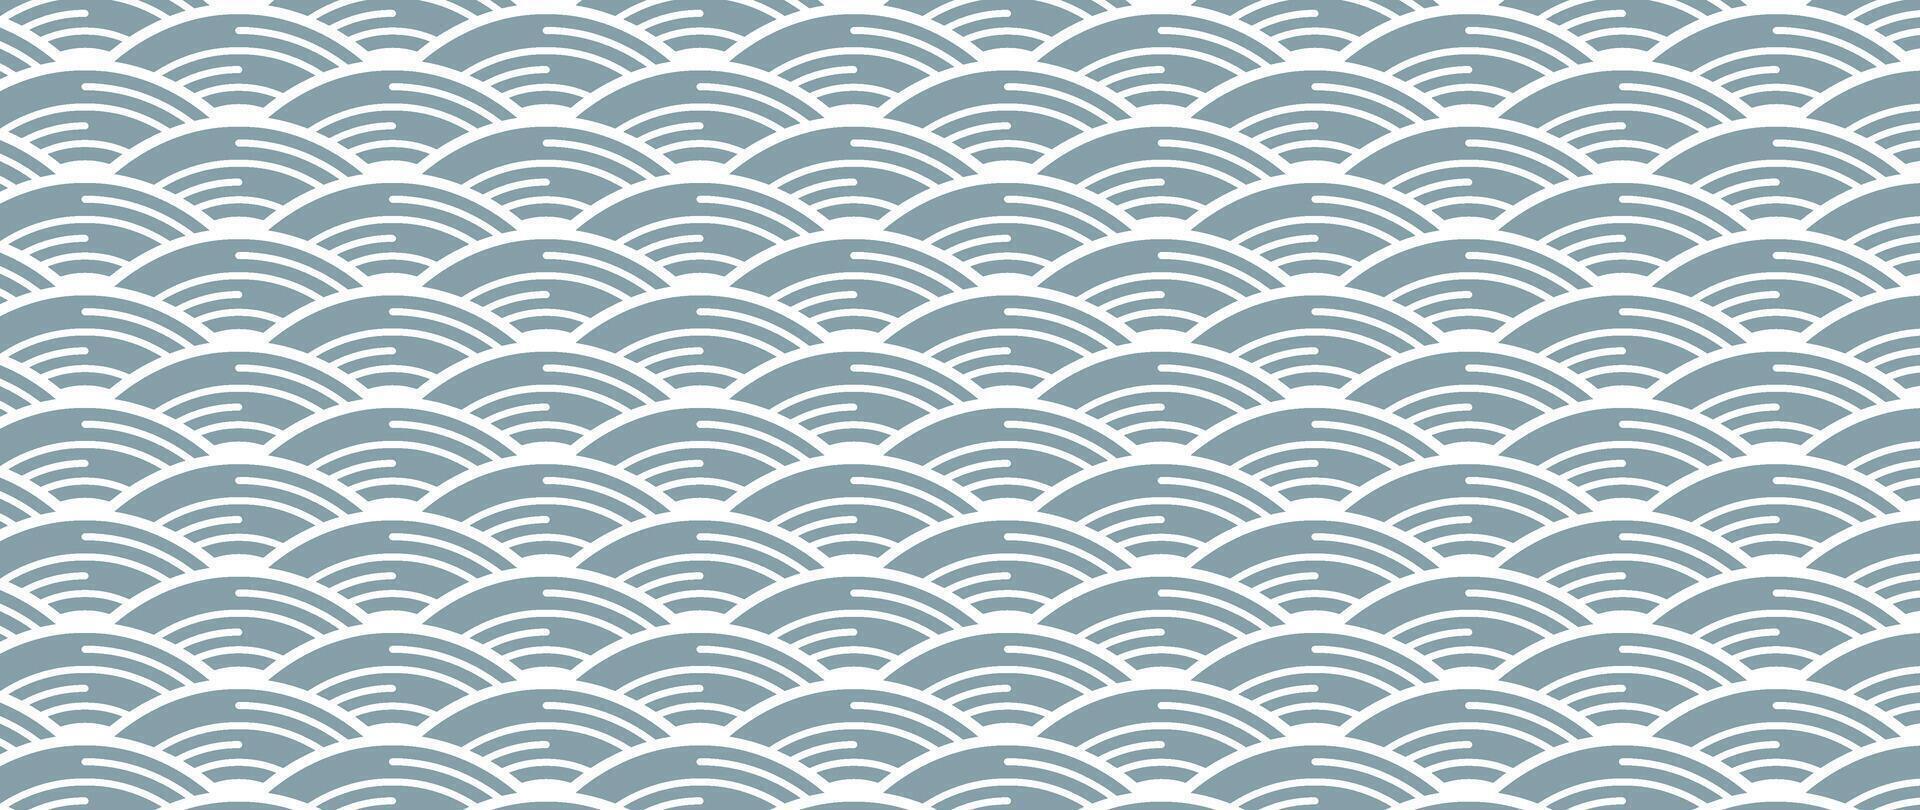 Japanese gray wave background vector. Wallpaper design with gray and white ocean wave pattern backdrop. Modern luxury oriental illustration for cover, banner, website, decor, border. vector